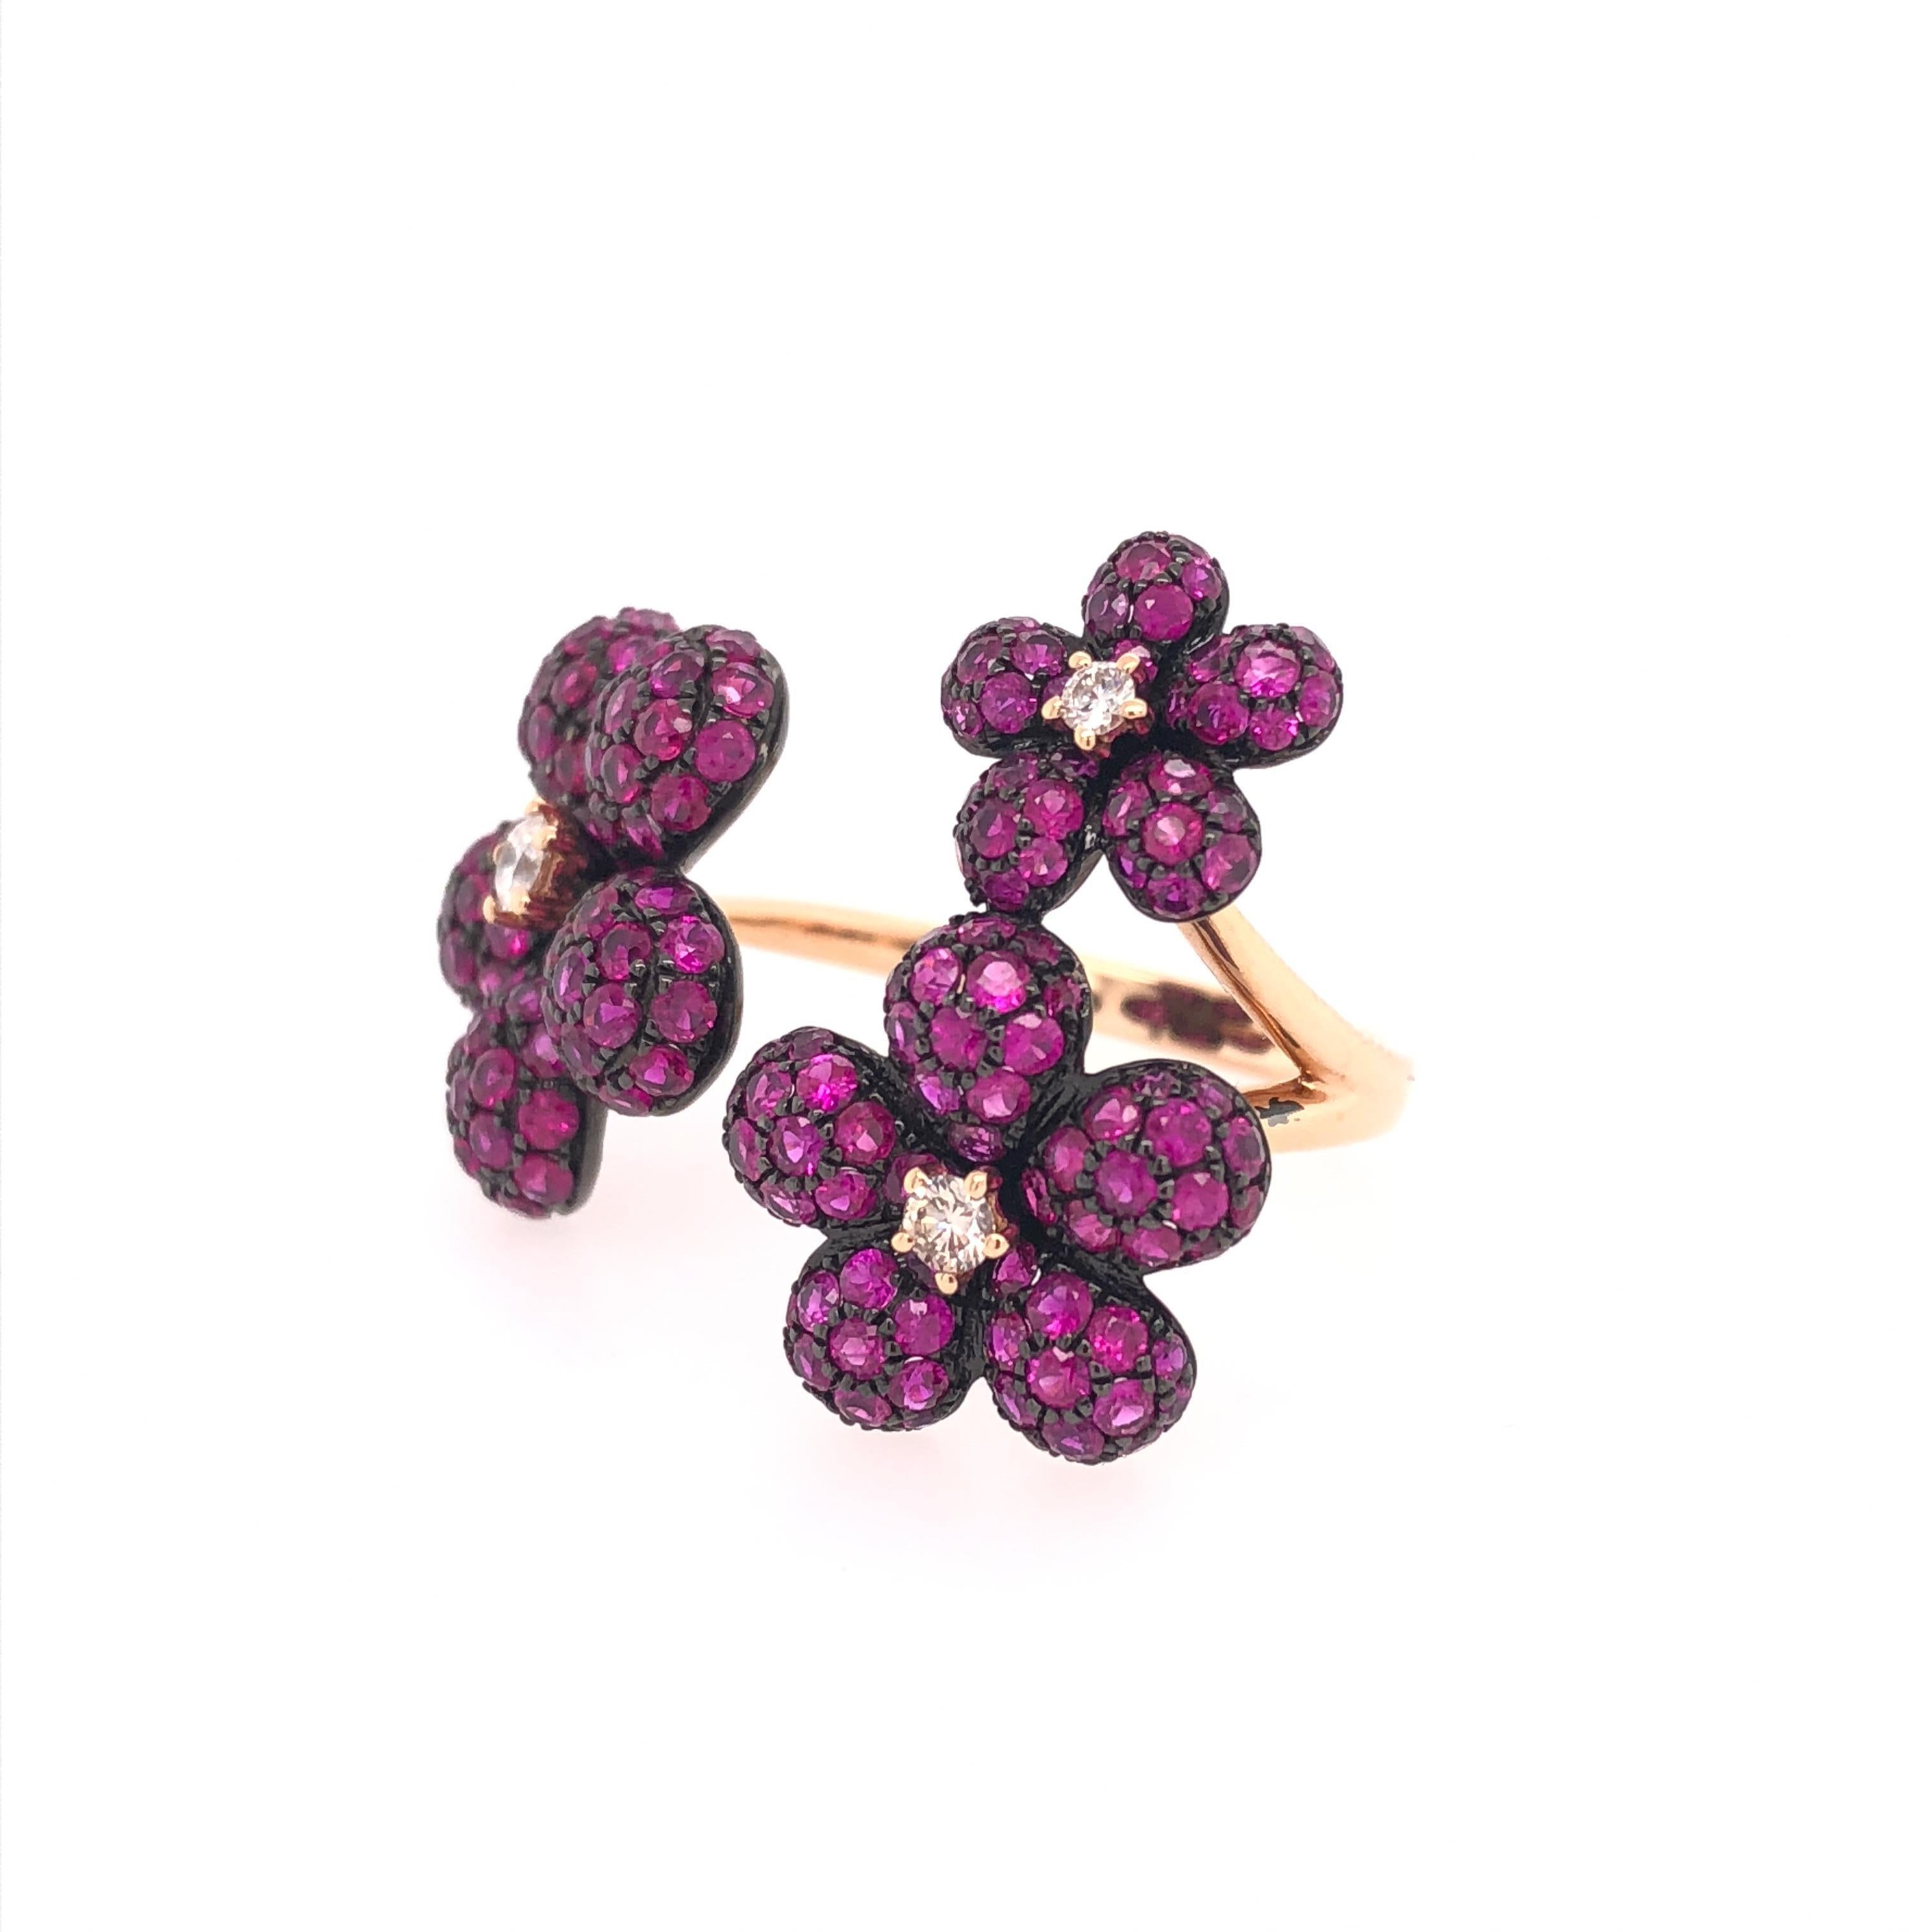 Ruby Collection

Pavé Ruby and round Diamond flower shaped cocktail ring set in 18K rose gold.

Ruby: 3.16ct total weight.
Diamonds: 0.14ct total weight.
All diamonds are G-H/SI stones.